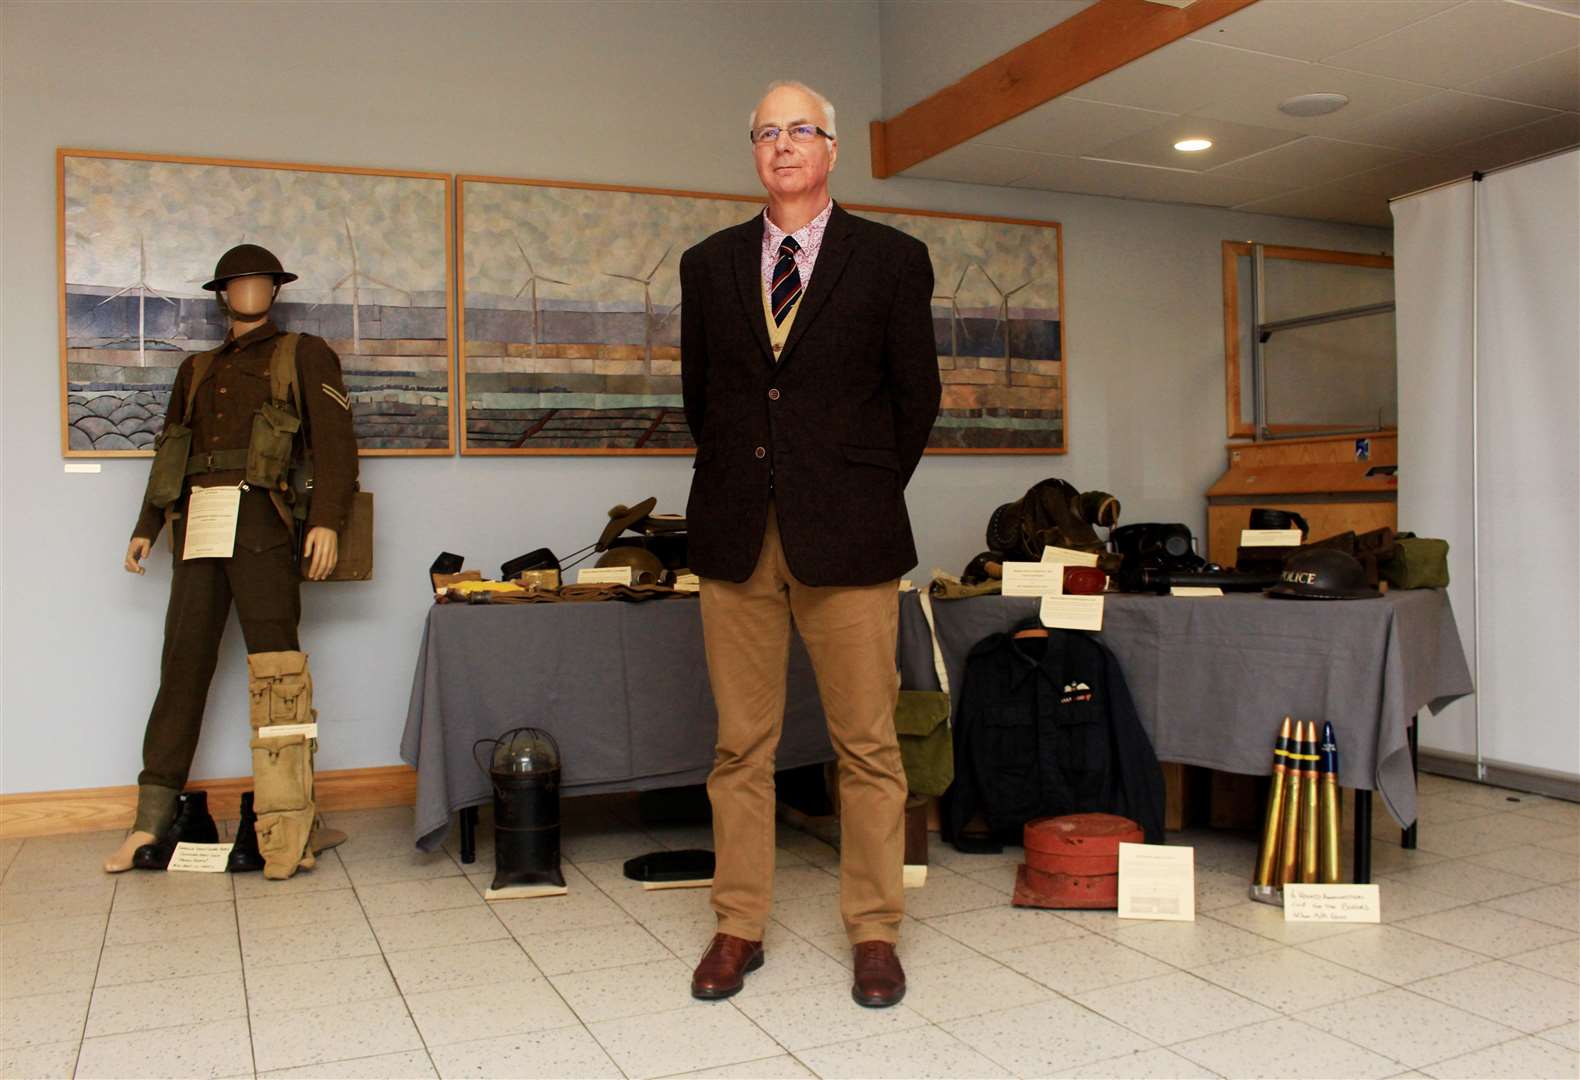 Andrew Guttridge, a member of the Caithness At War steering group, beside a display of his wartime memorabilia that was set up in Wick John O'Groats Airport for Saturday's launch event. Picture: Alan Hendry